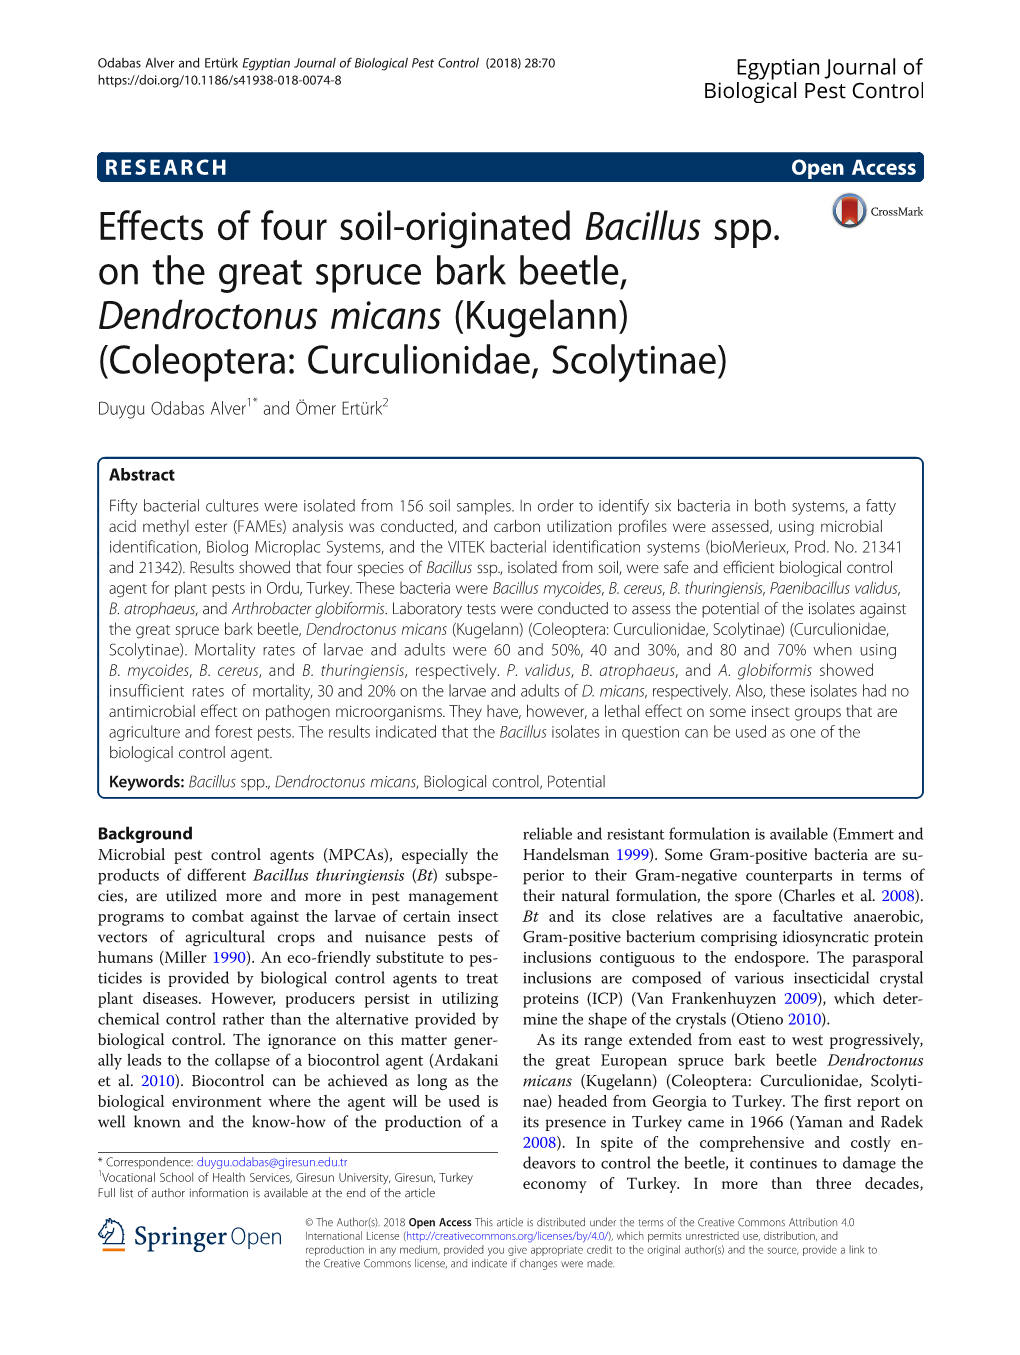 Effects of Four Soil-Originated Bacillus Spp. on the Great Spruce Bark Beetle